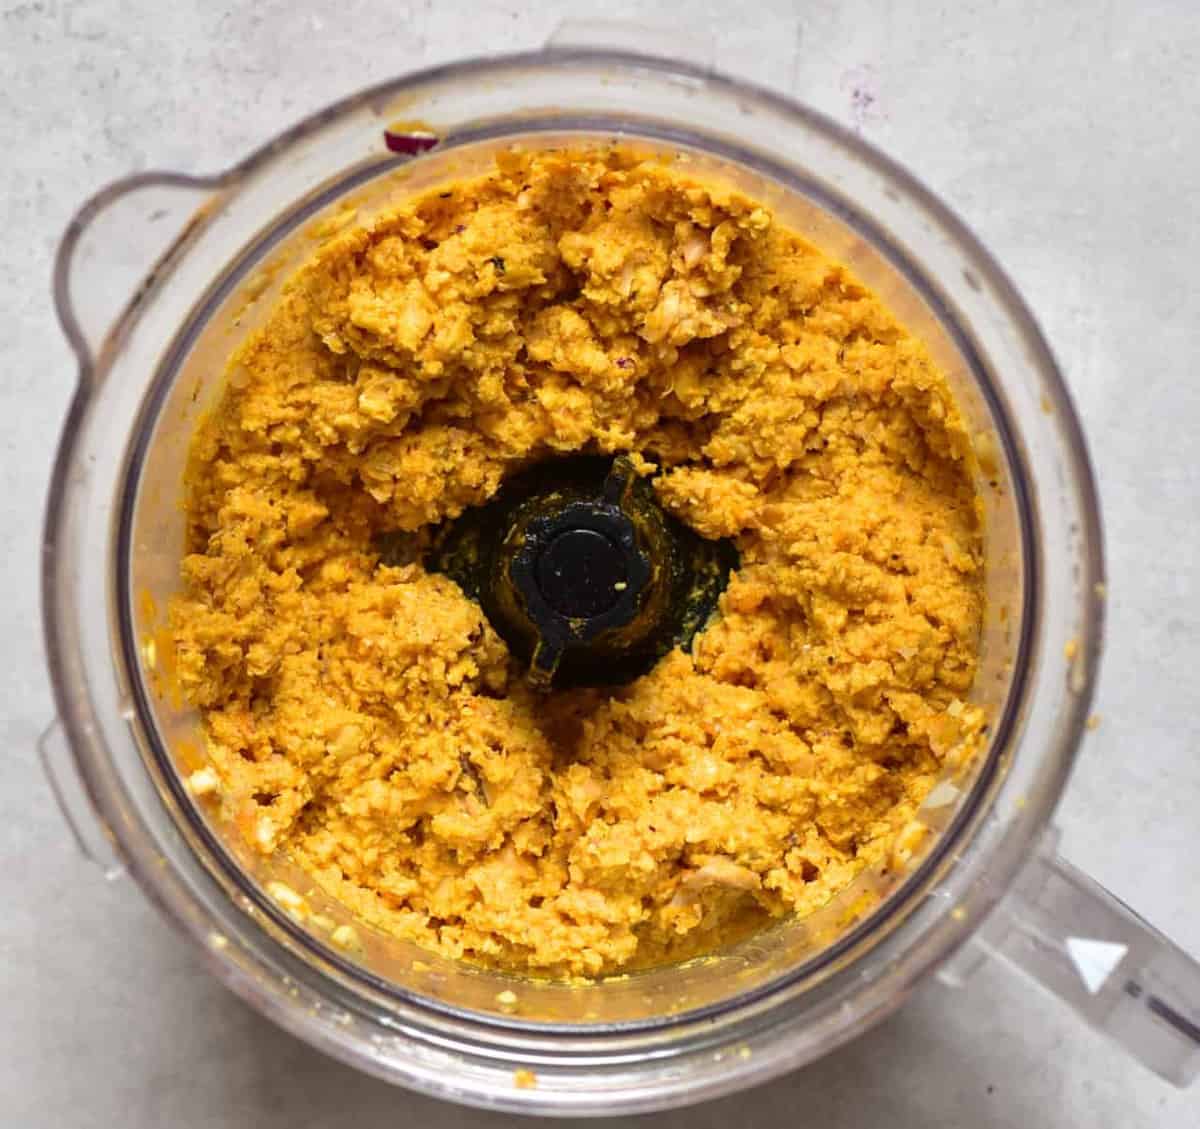 Orange falafel paste, obtained by using a baked butternut squash